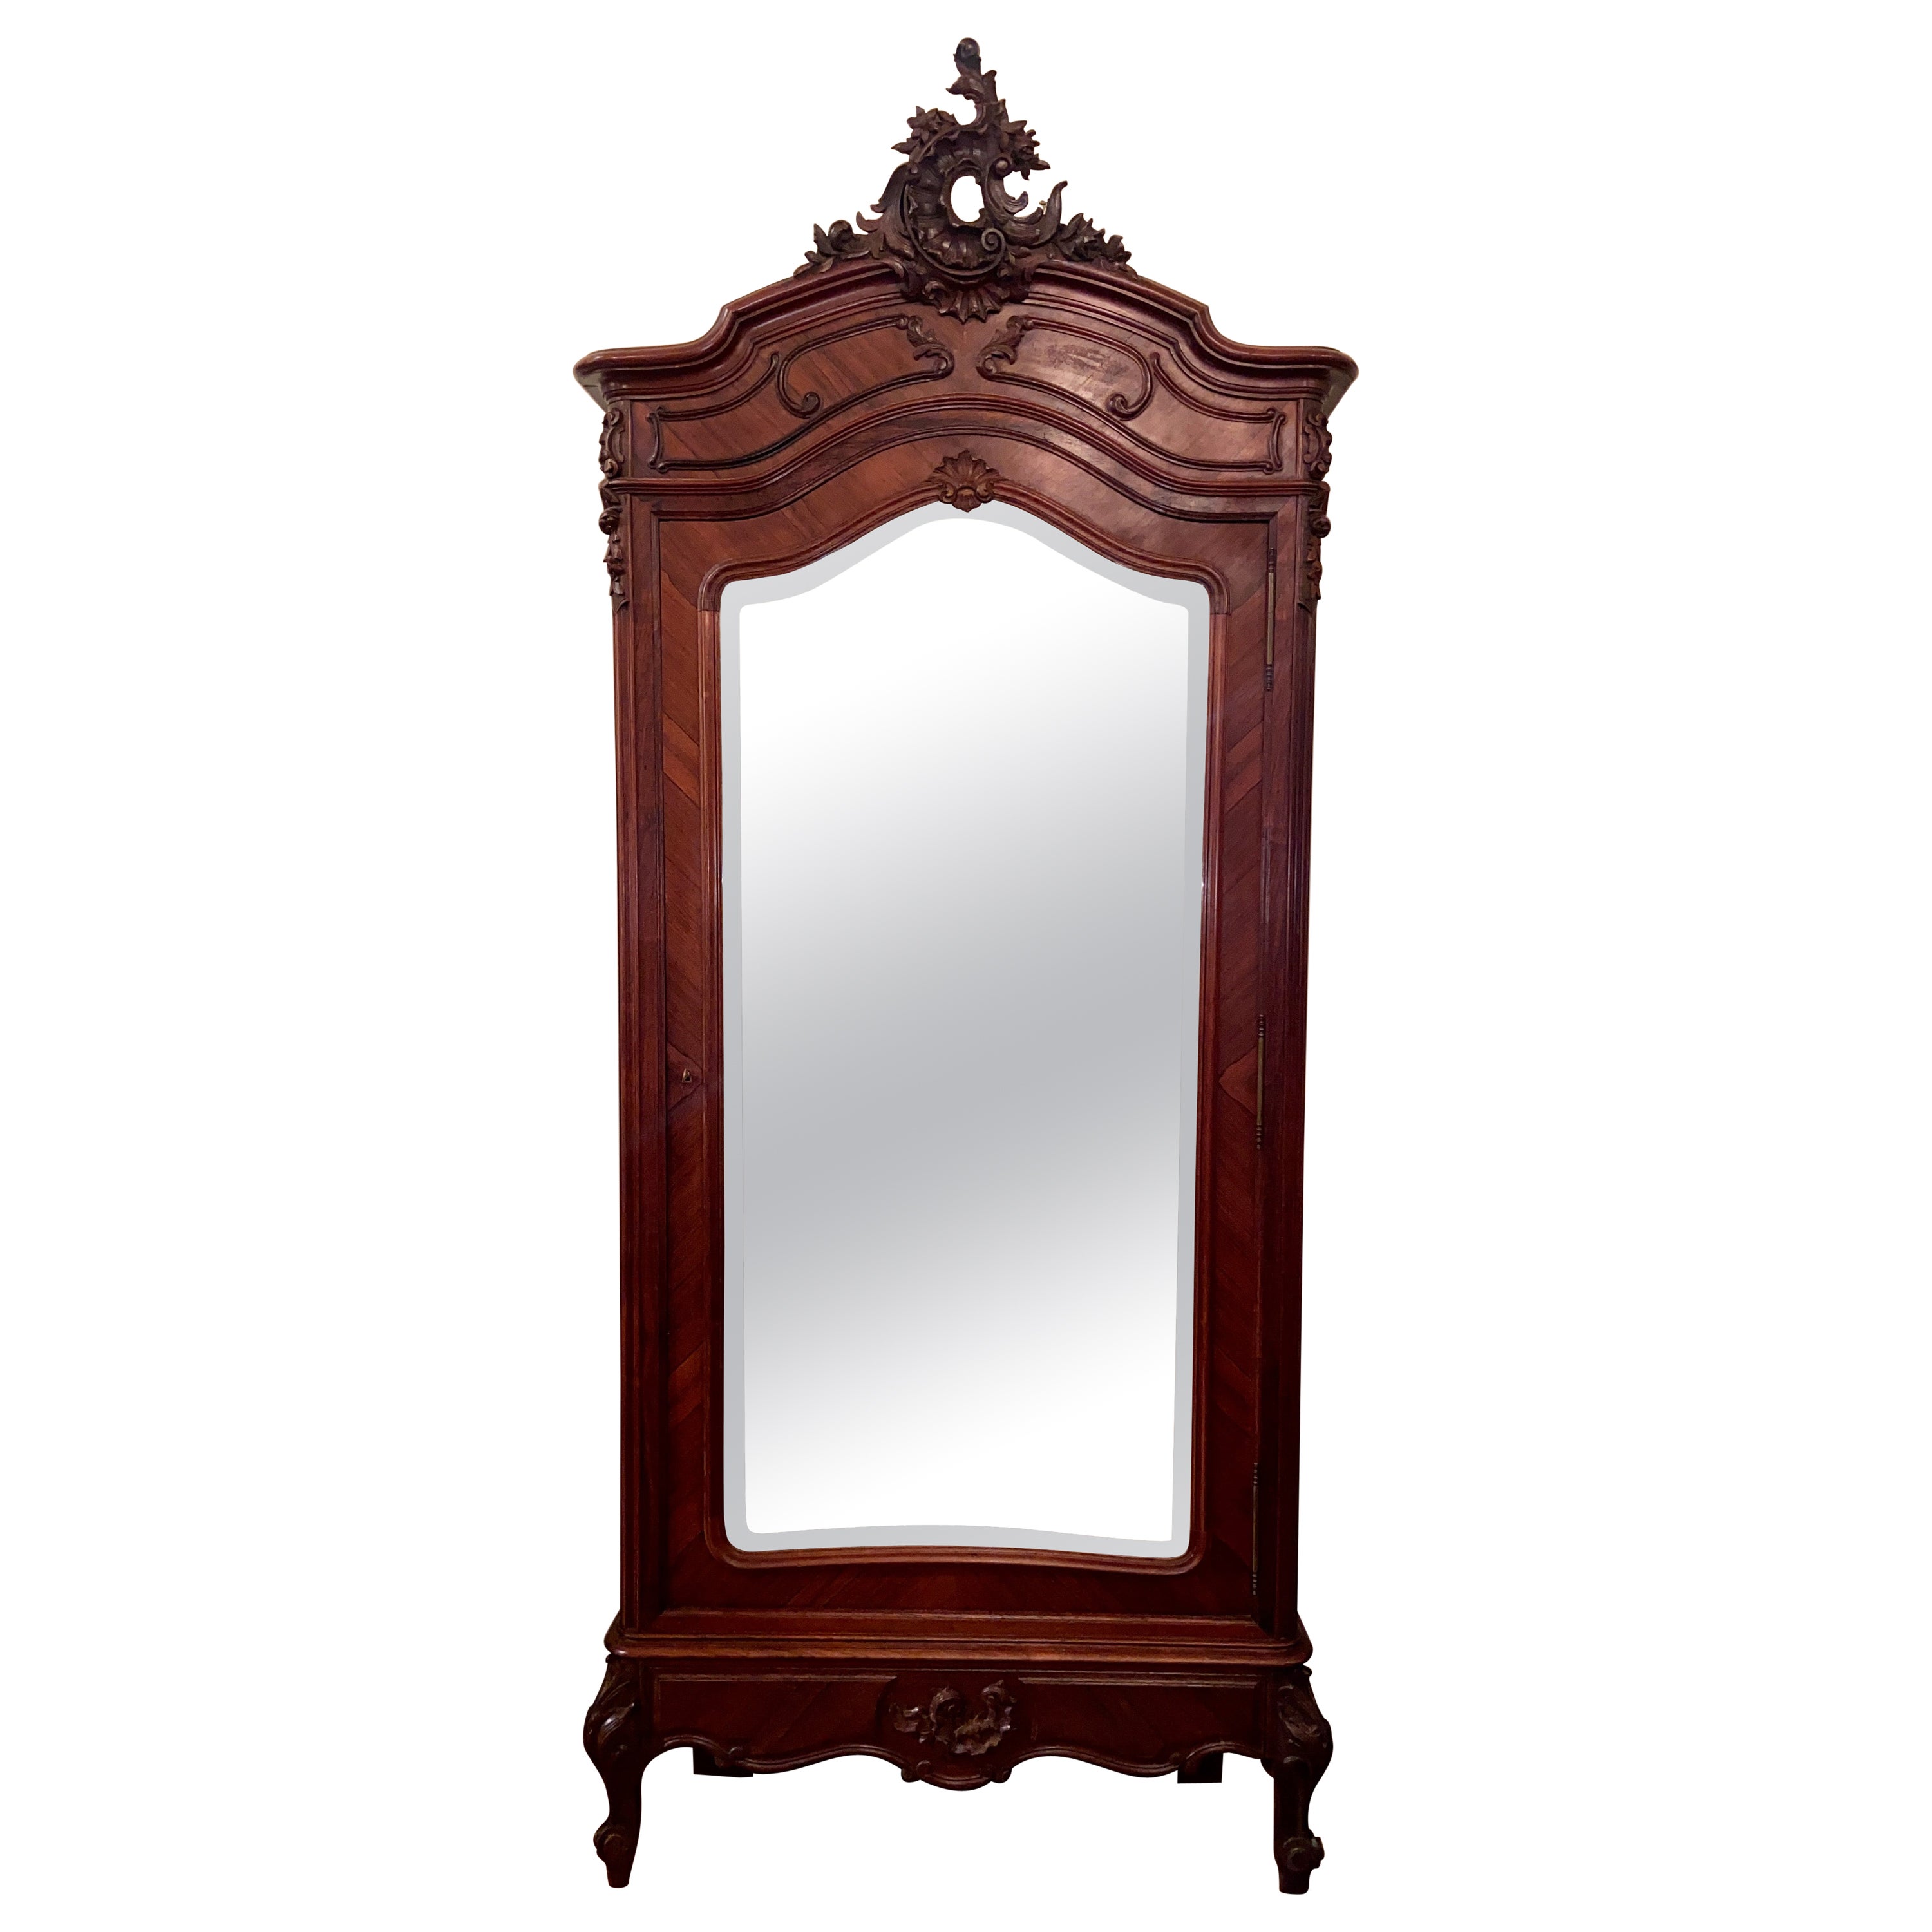 Antique French Rosewood Single Door Armoire with Beveled Mirror, circa 1880